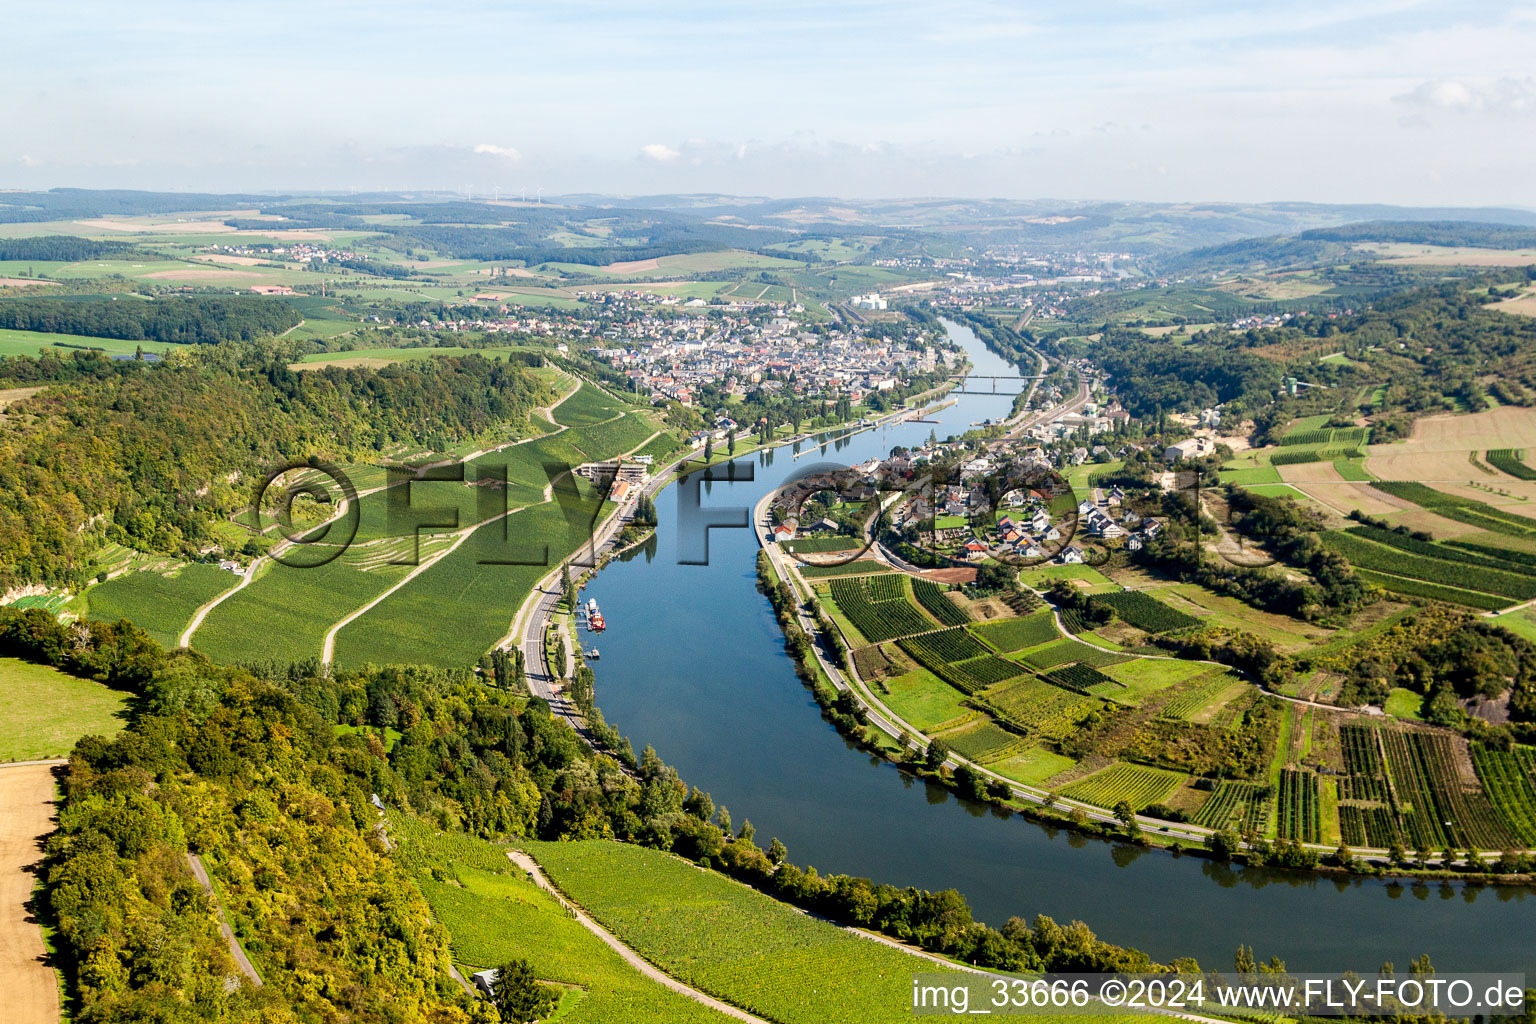 Village on the river bank areas of the river Mosel in Wellen in the state Rhineland-Palatinate, Germany